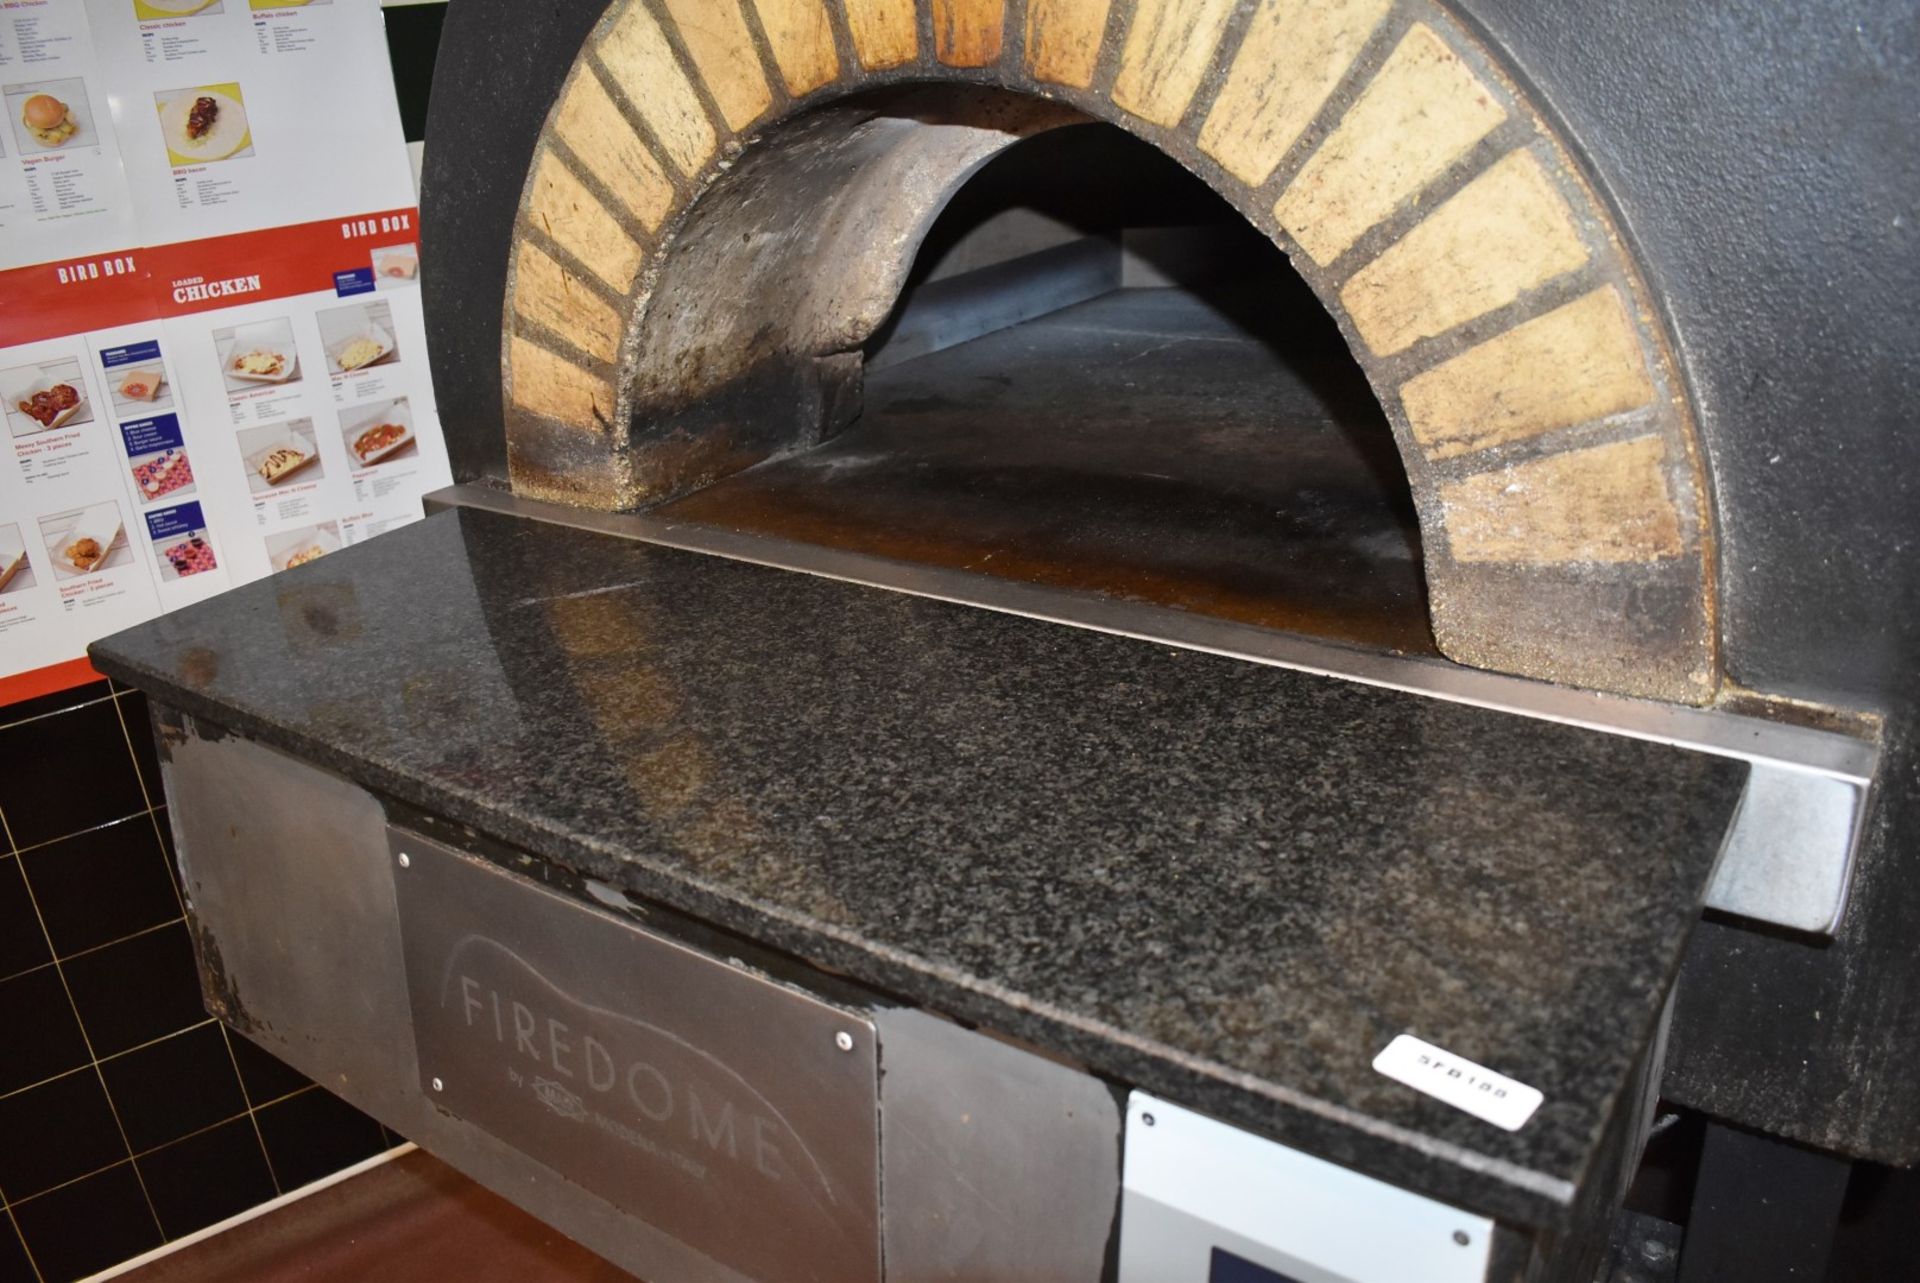 1 x MAM Firedome Commercial Stone Baked Gas Pizza Oven - Made in Italy - Image 8 of 16